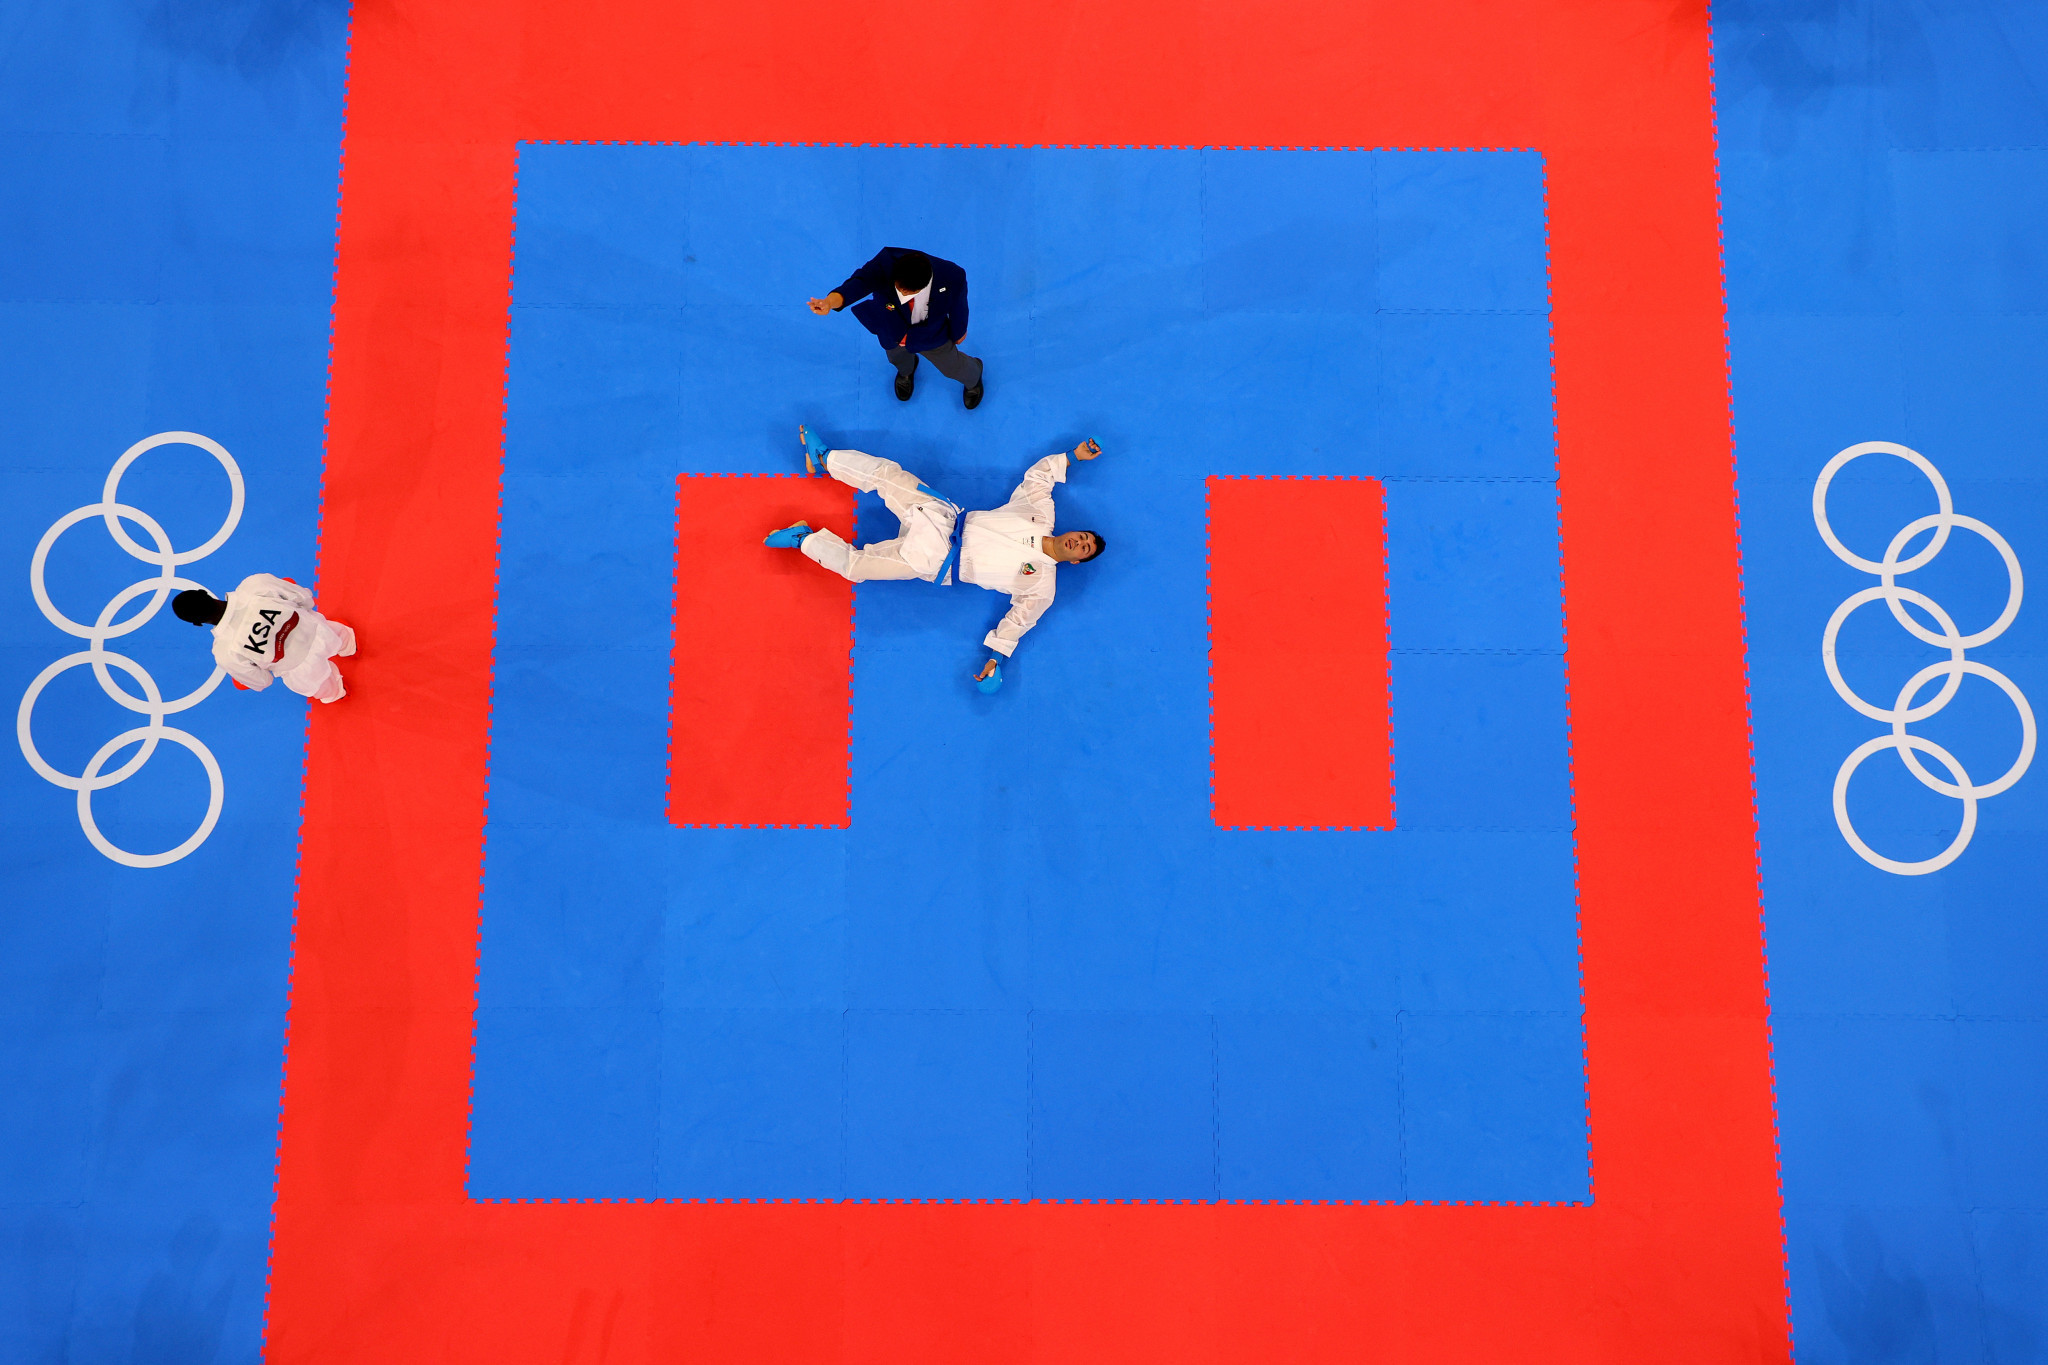 Karate made its Olympic debut at Tokyo 2020 ©Getty Images